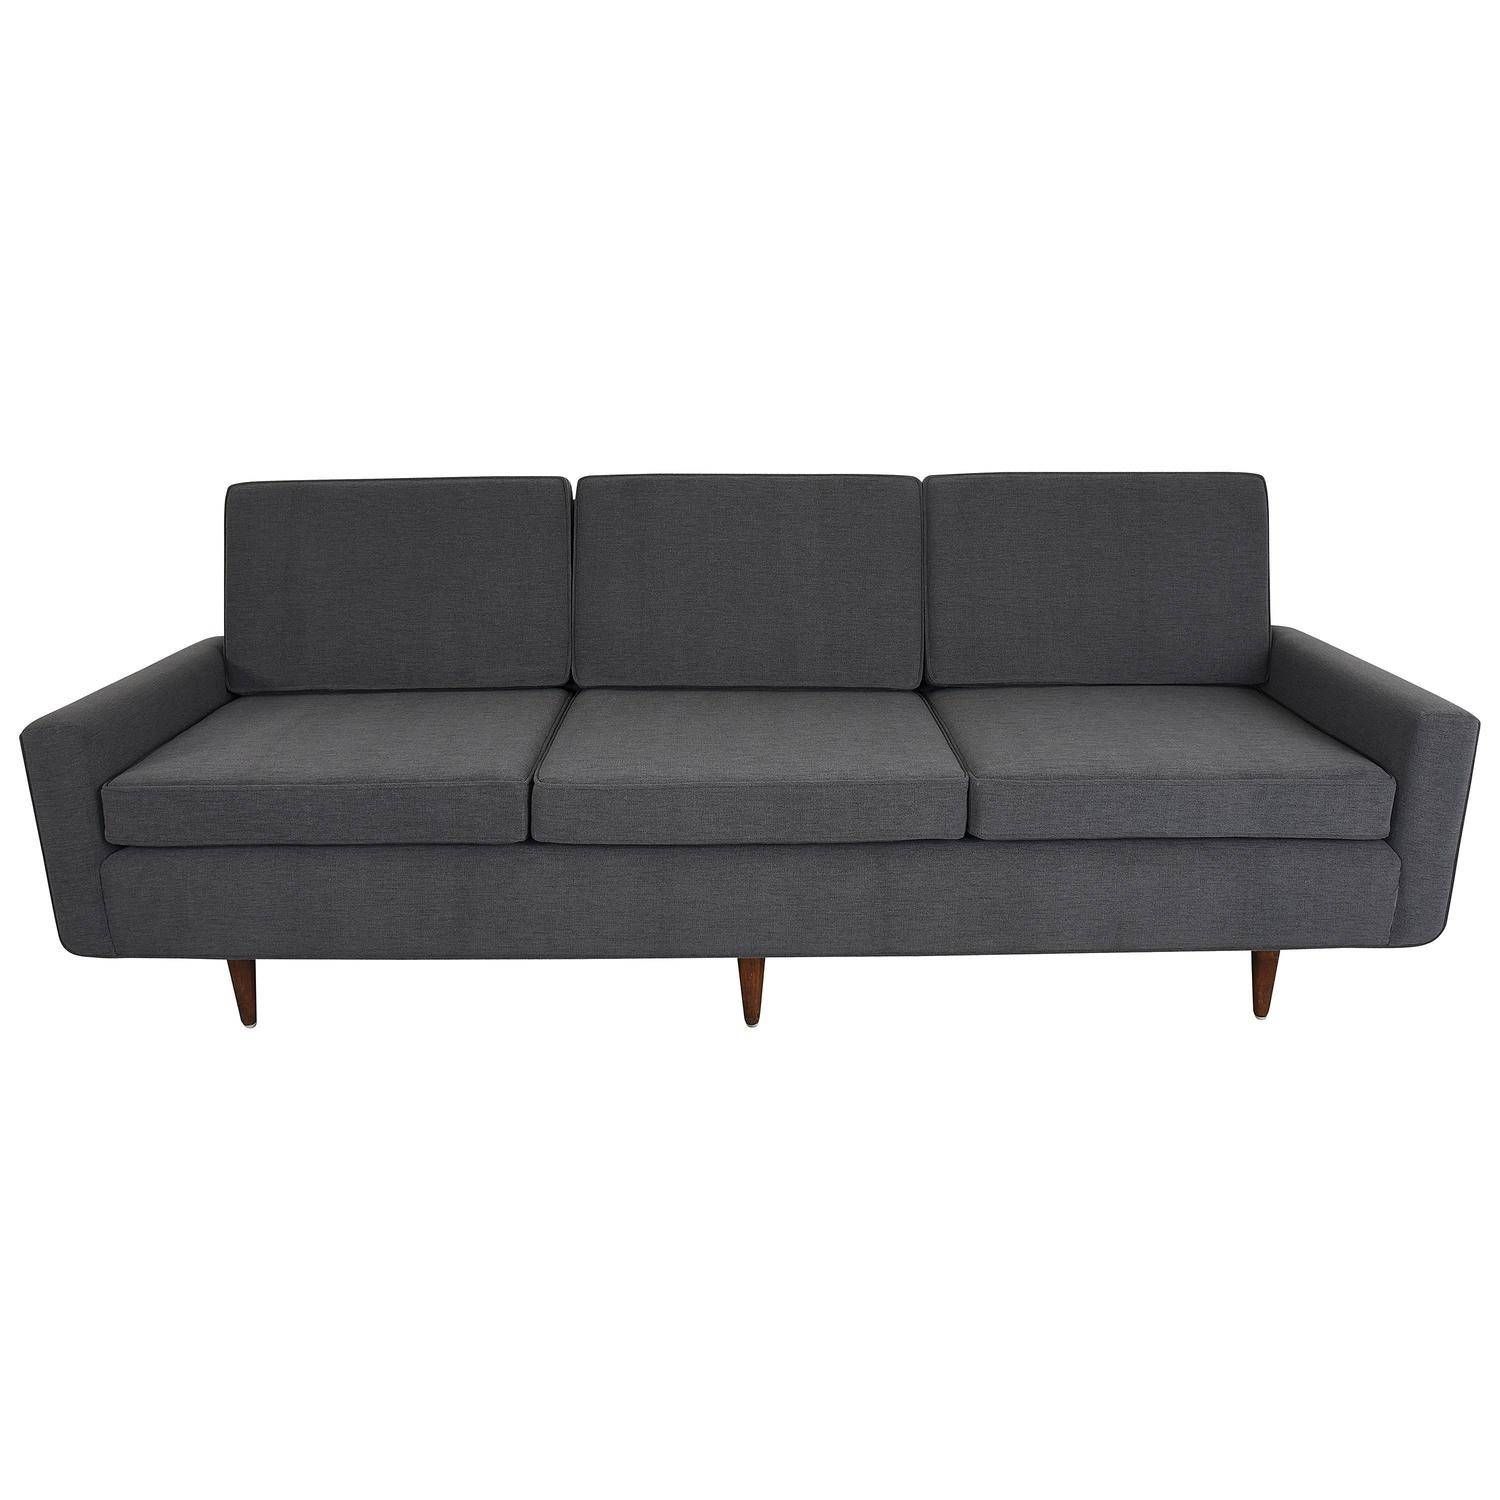 Florence Knoll Sofa Three Seat Sofa, Model 26, Pair Available For With Regard To Florence Knoll Sofas (View 3 of 15)